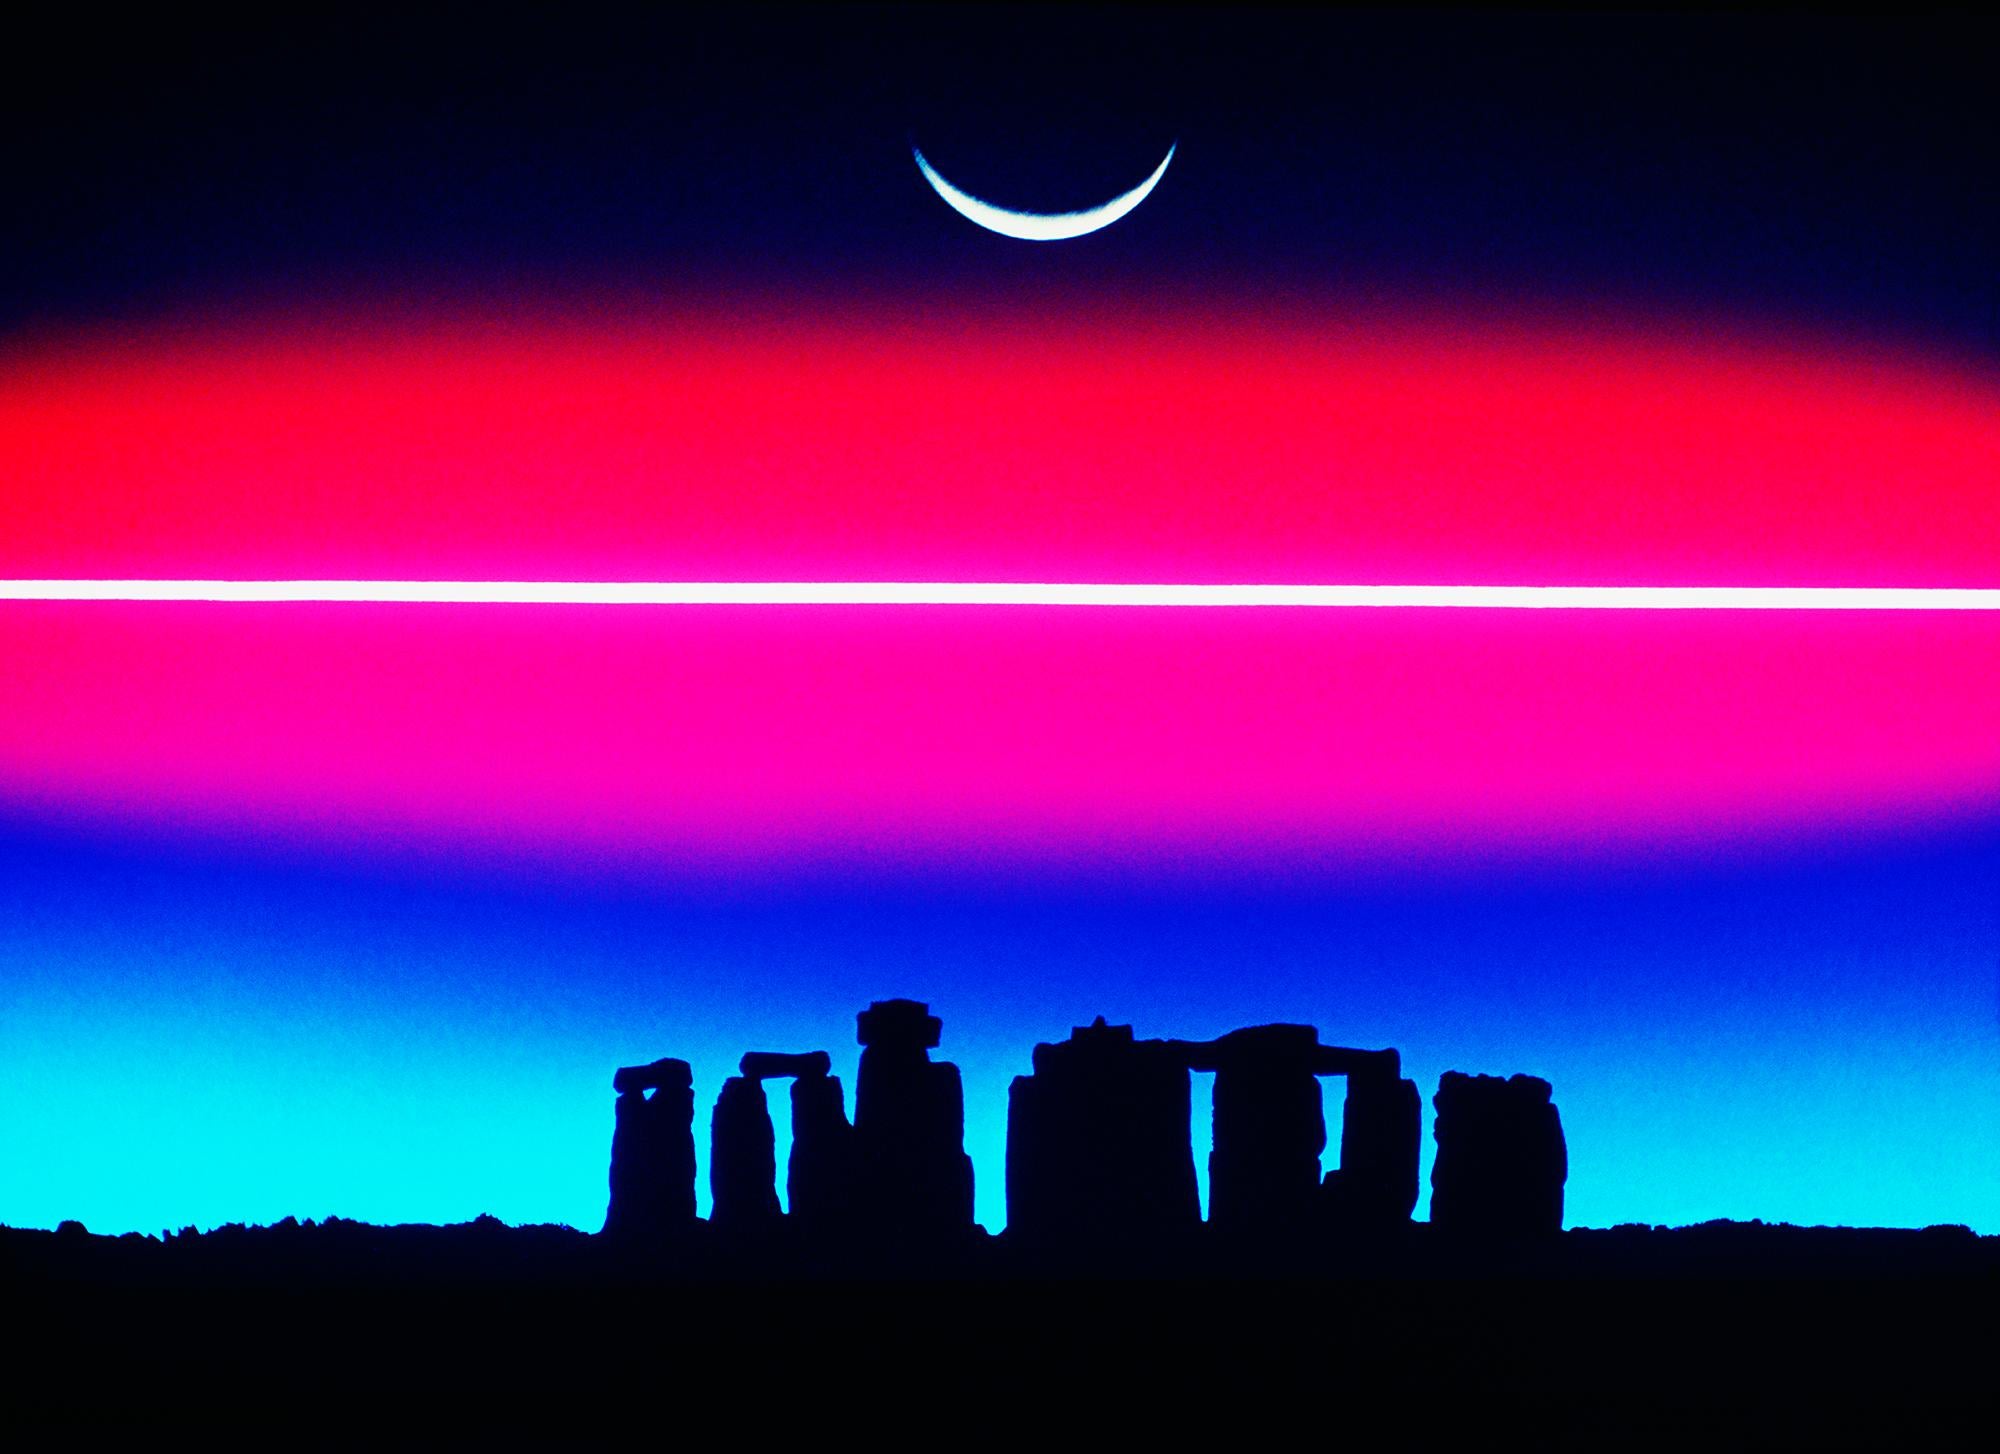 Mitchell Funk Landscape Photograph - Stonehenge and Eclipse with Pink Sci-Fi Glow